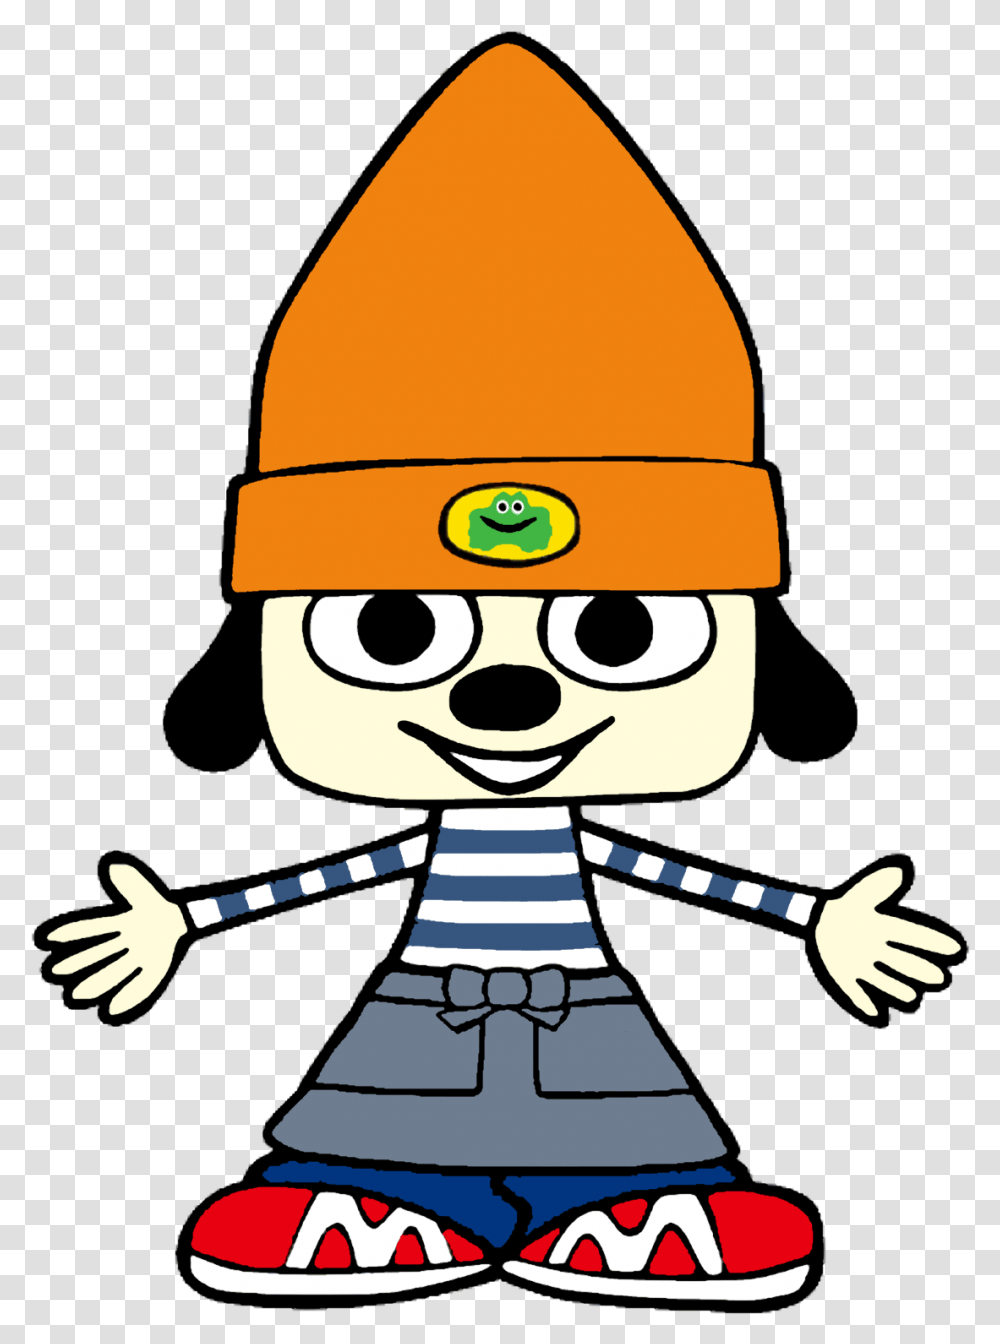 Parappa The Rapper Parappa The Rapper New Anime, Helmet, Apparel Transparent Png